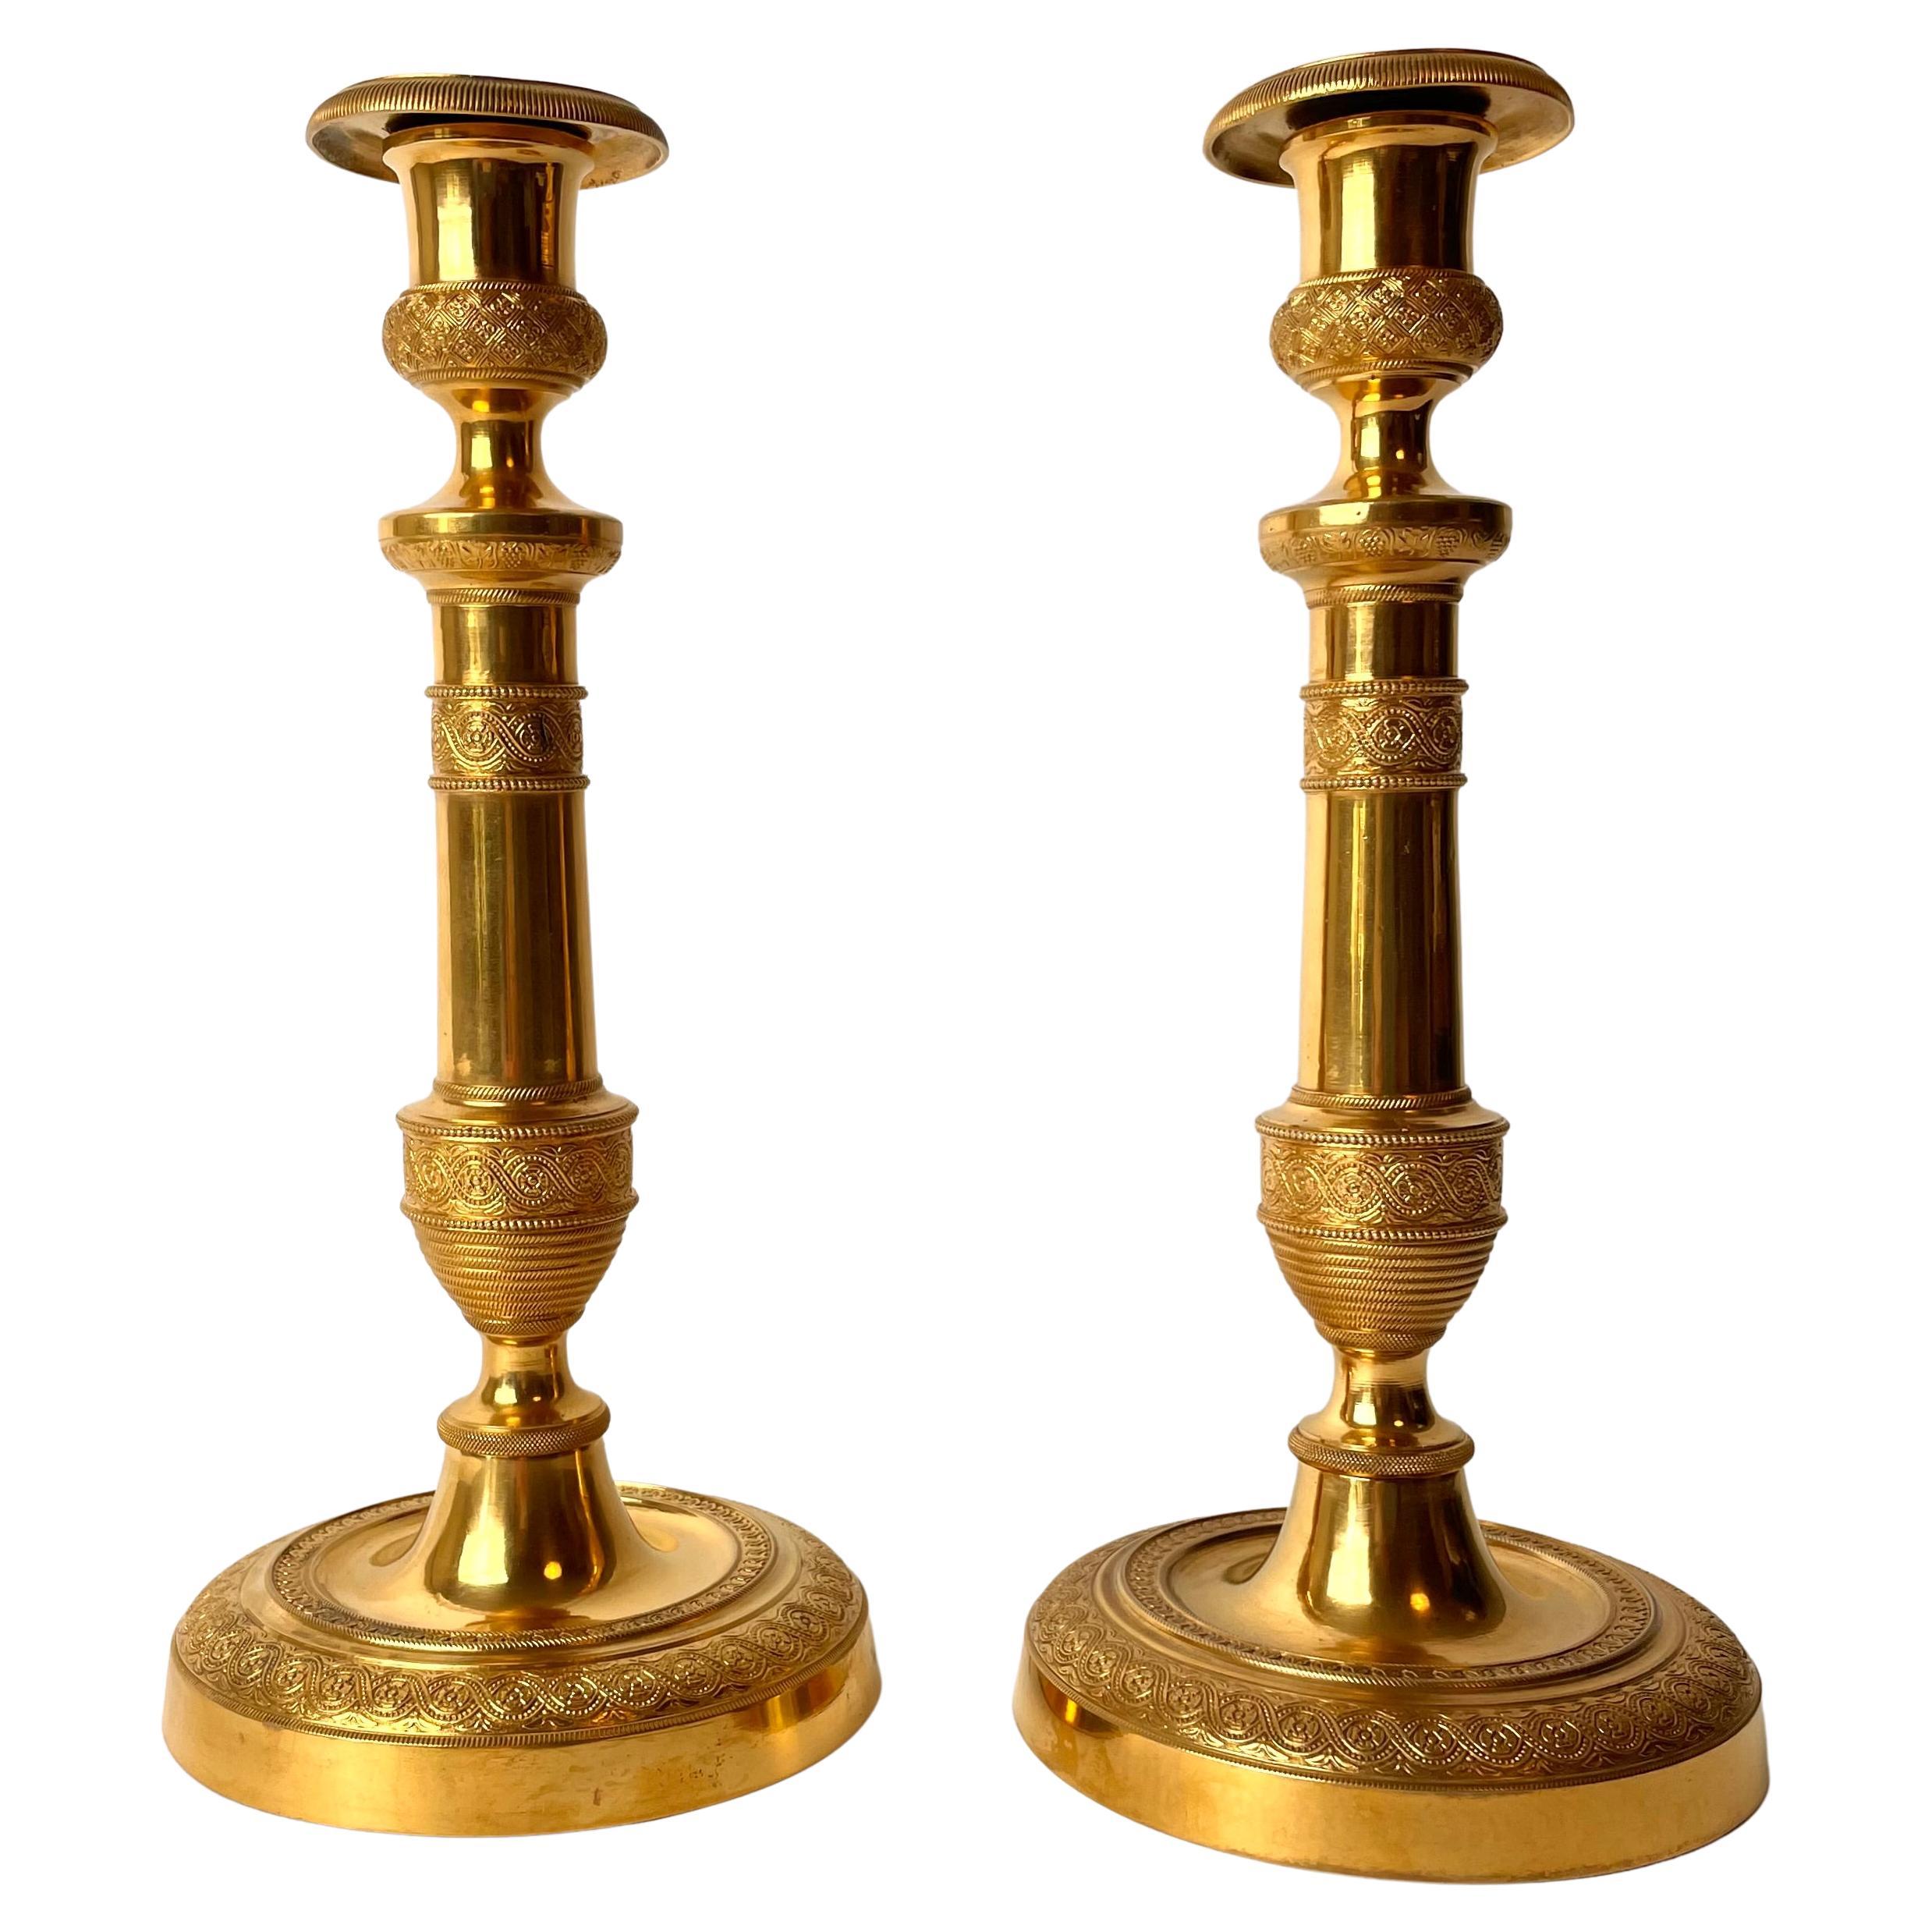 Pair of Large and Sophisticated Empire Candlesticks in Gilded Bronze